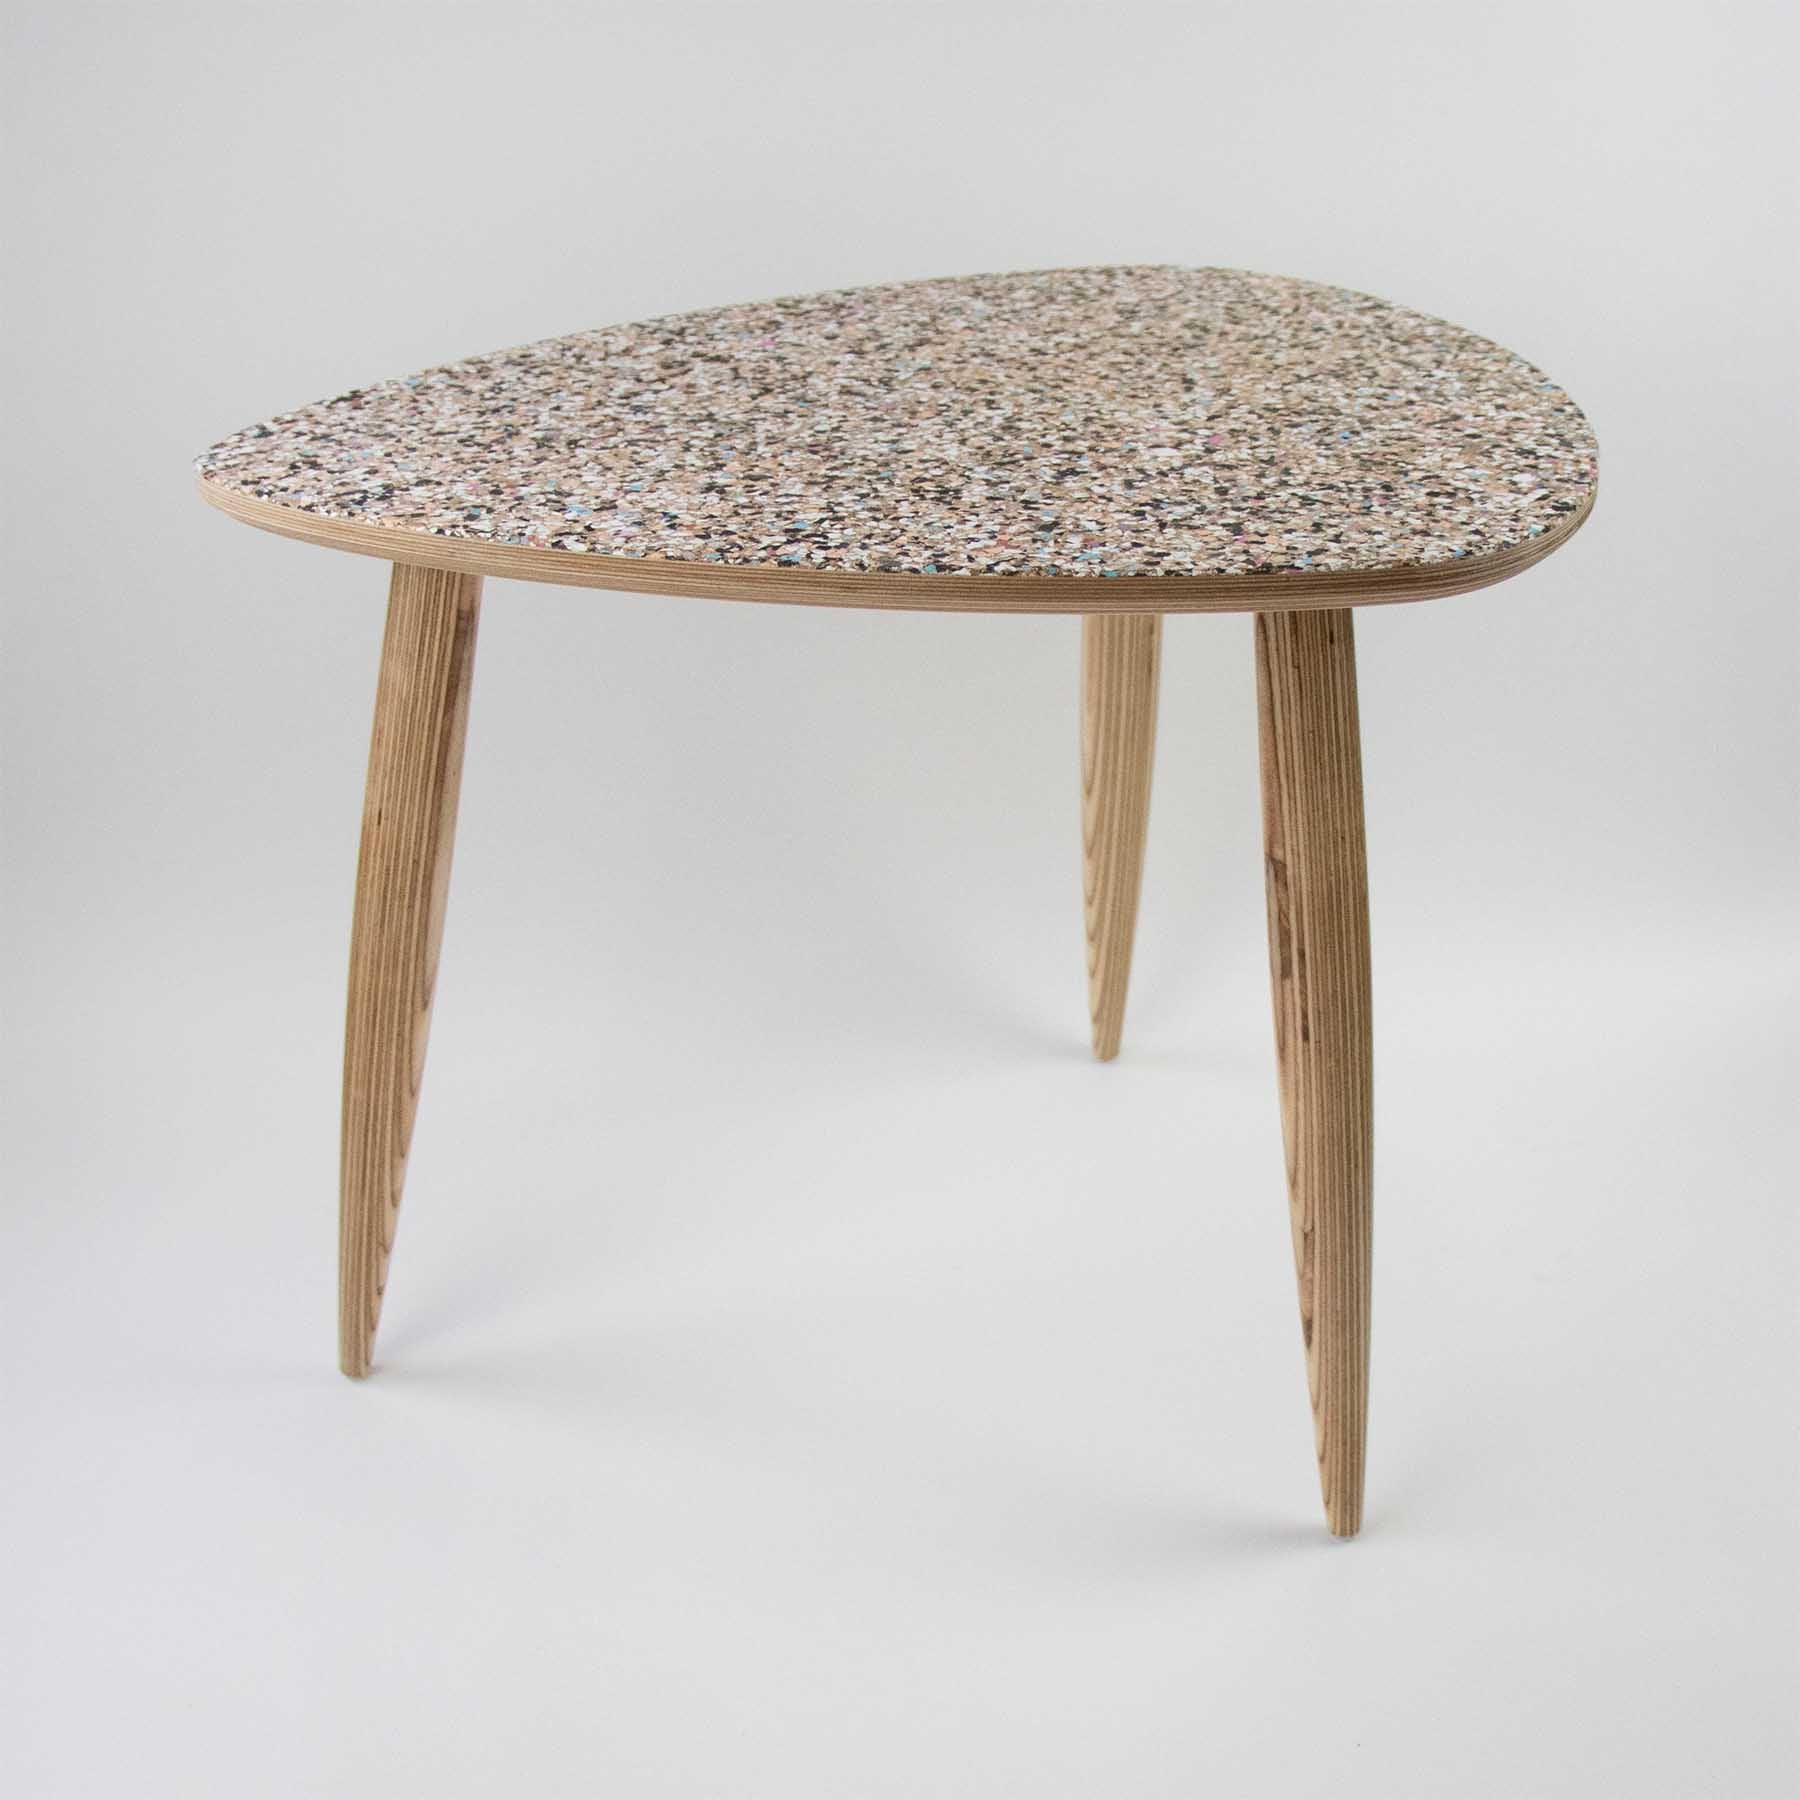 Sustainable Wooden Side Table - Beach Clean